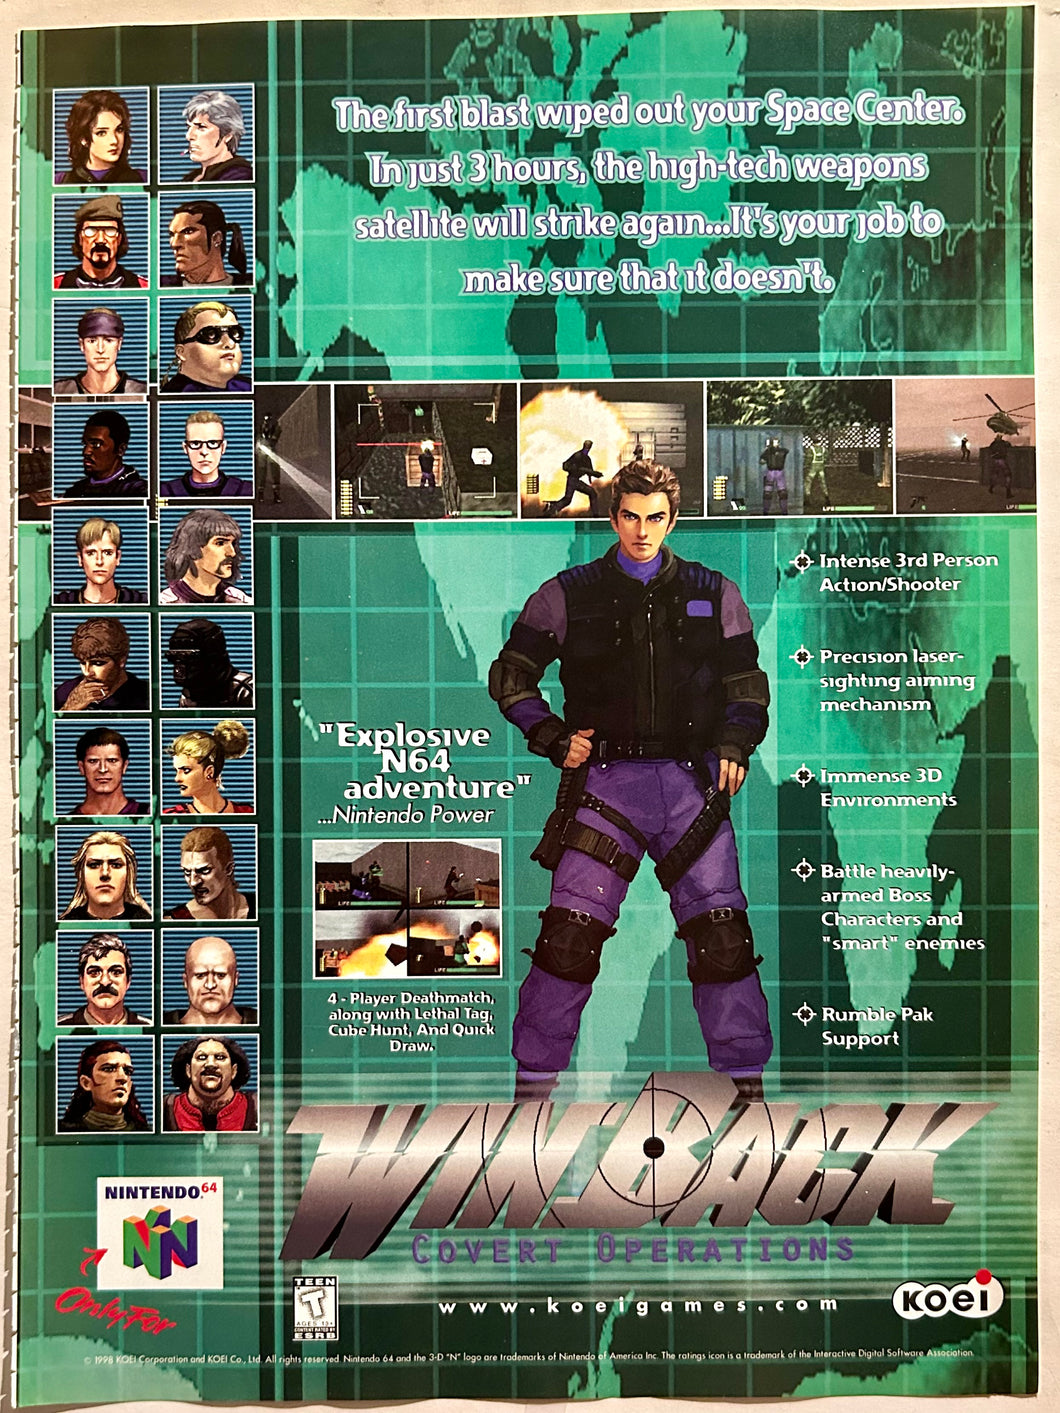 WinBack: Covert Operations - N64 - Original Vintage Advertisement - Print Ads - Laminated A4 Poster